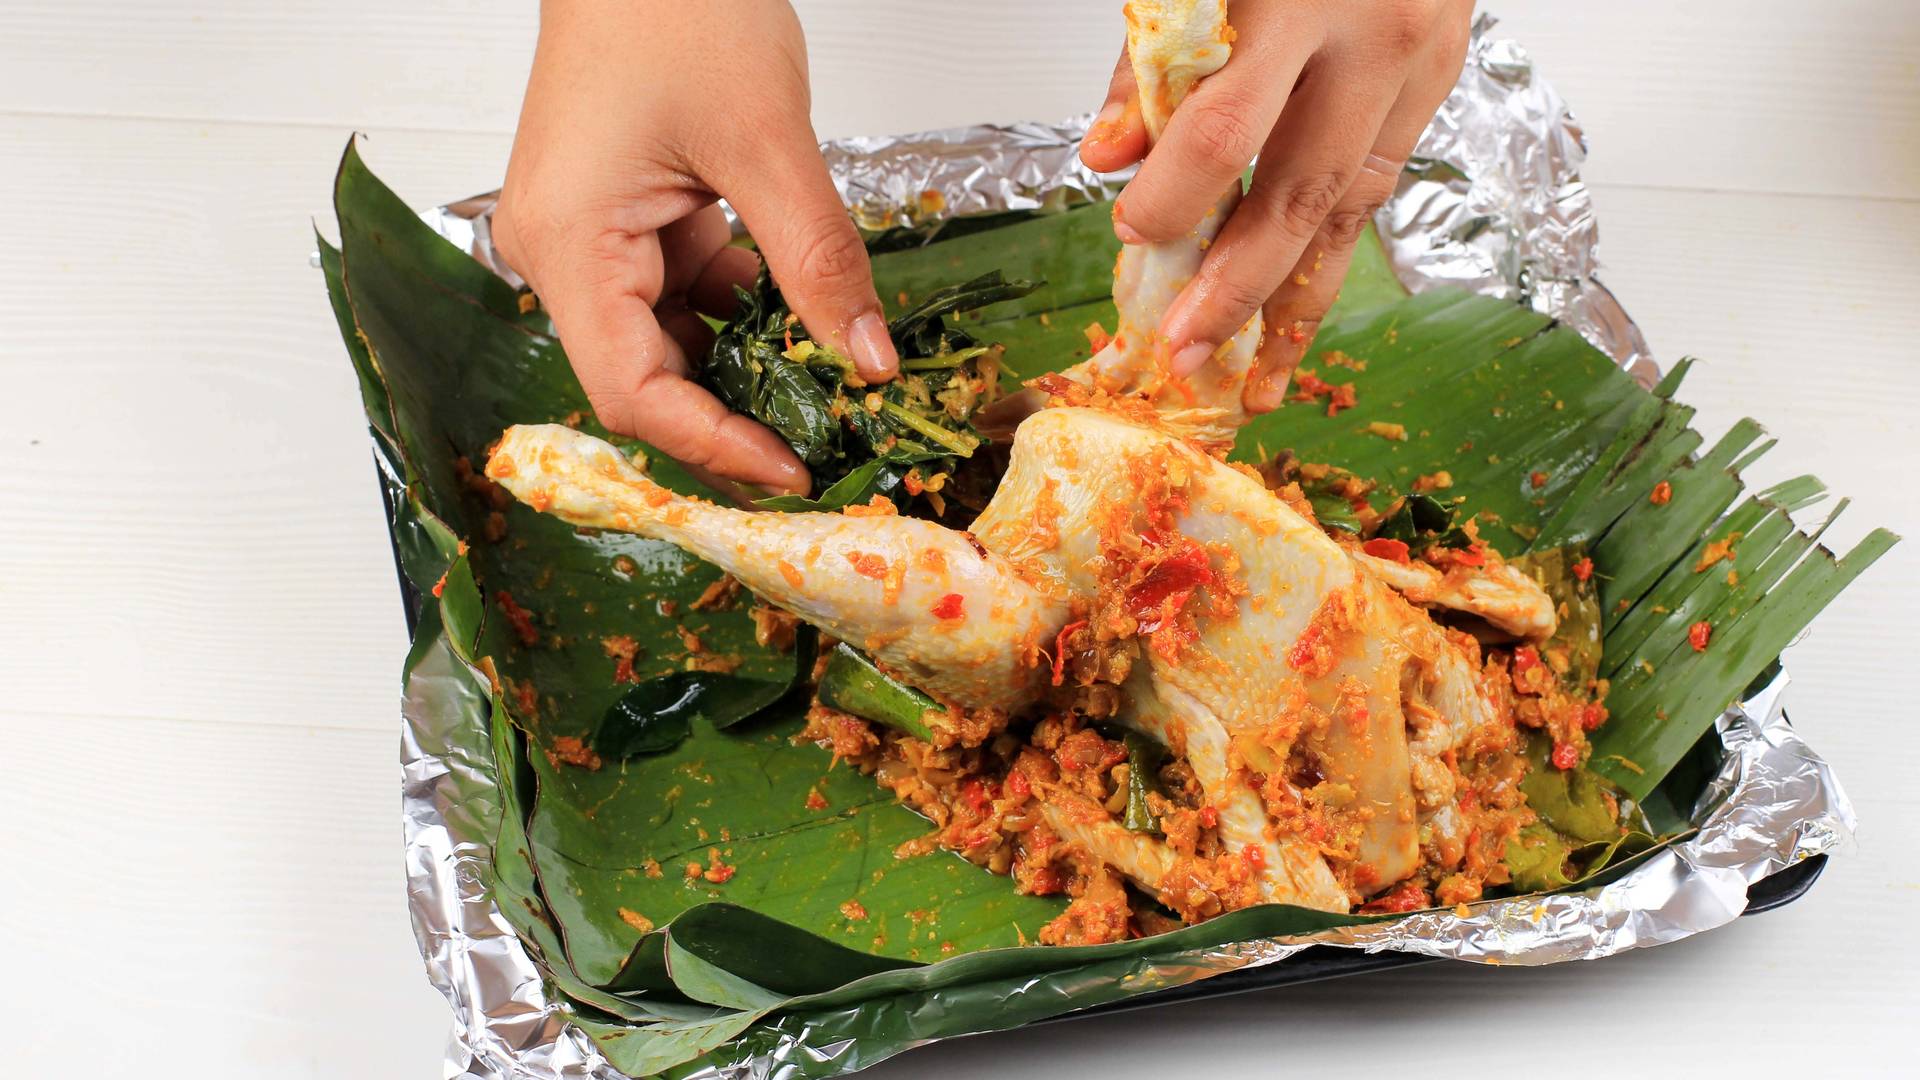 The cooking process for making Ayam Betutu, a Balinese spiced chicken dish